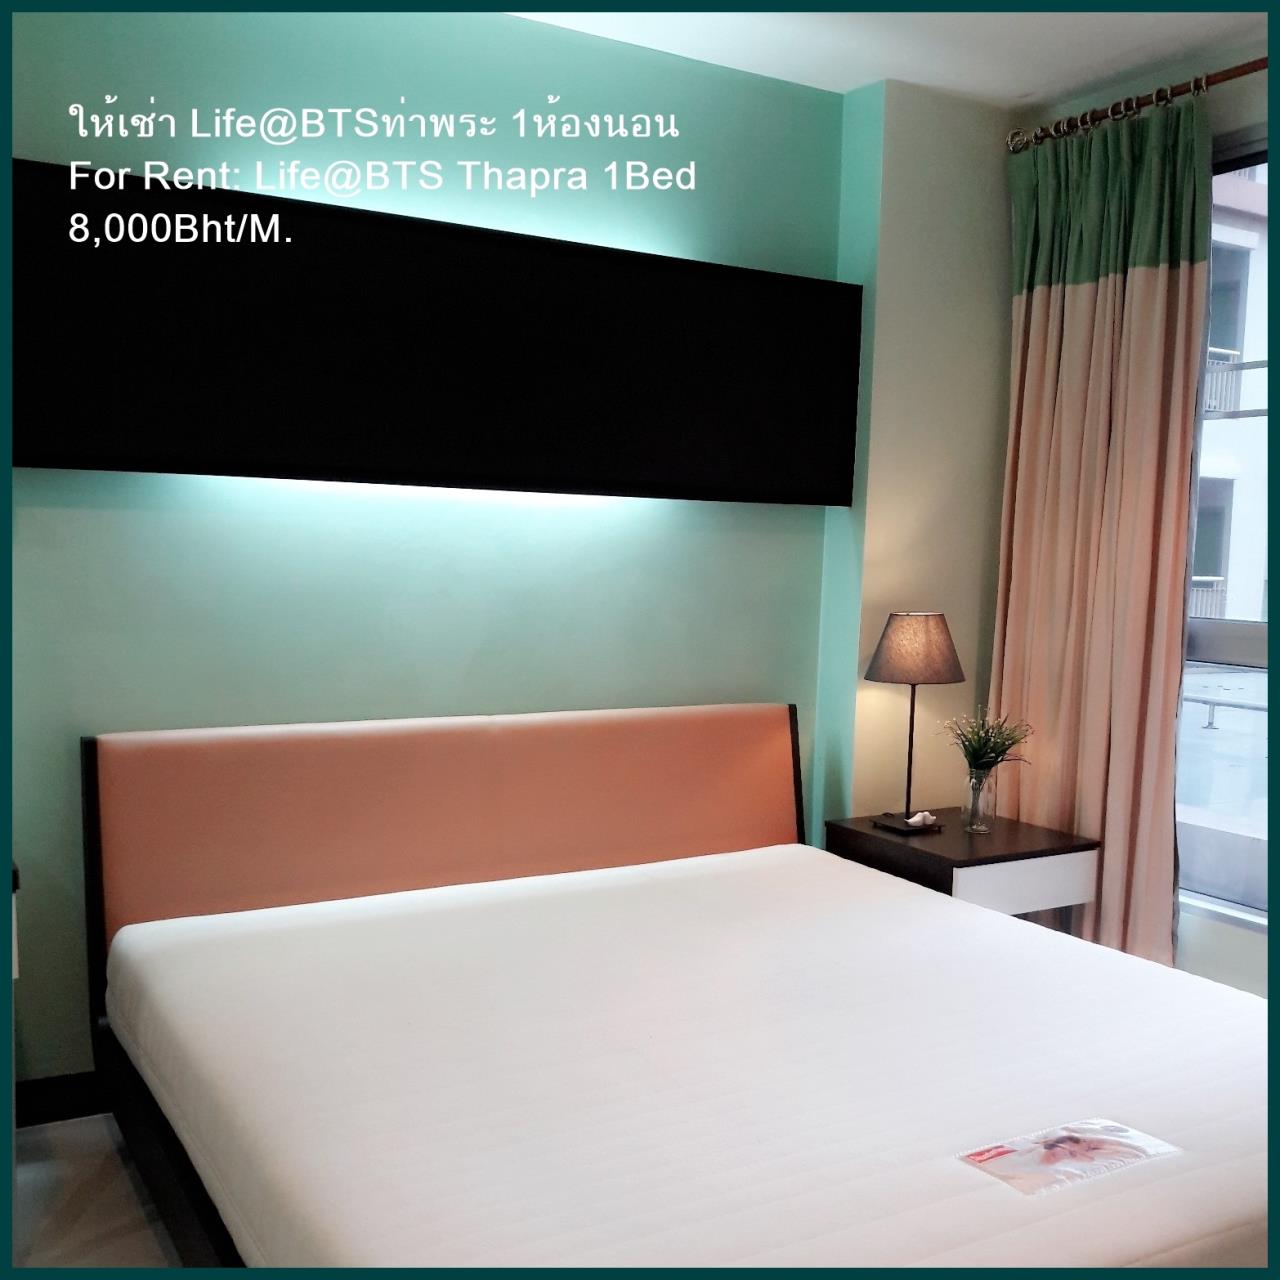 Ta (+66 9 5935 1592) Agency's For Rent condo at BTS Tha Phra 1 Bedroom fully furnished 7,500B/m near Talad Plu and Sathorn, clean and good condotion. 4